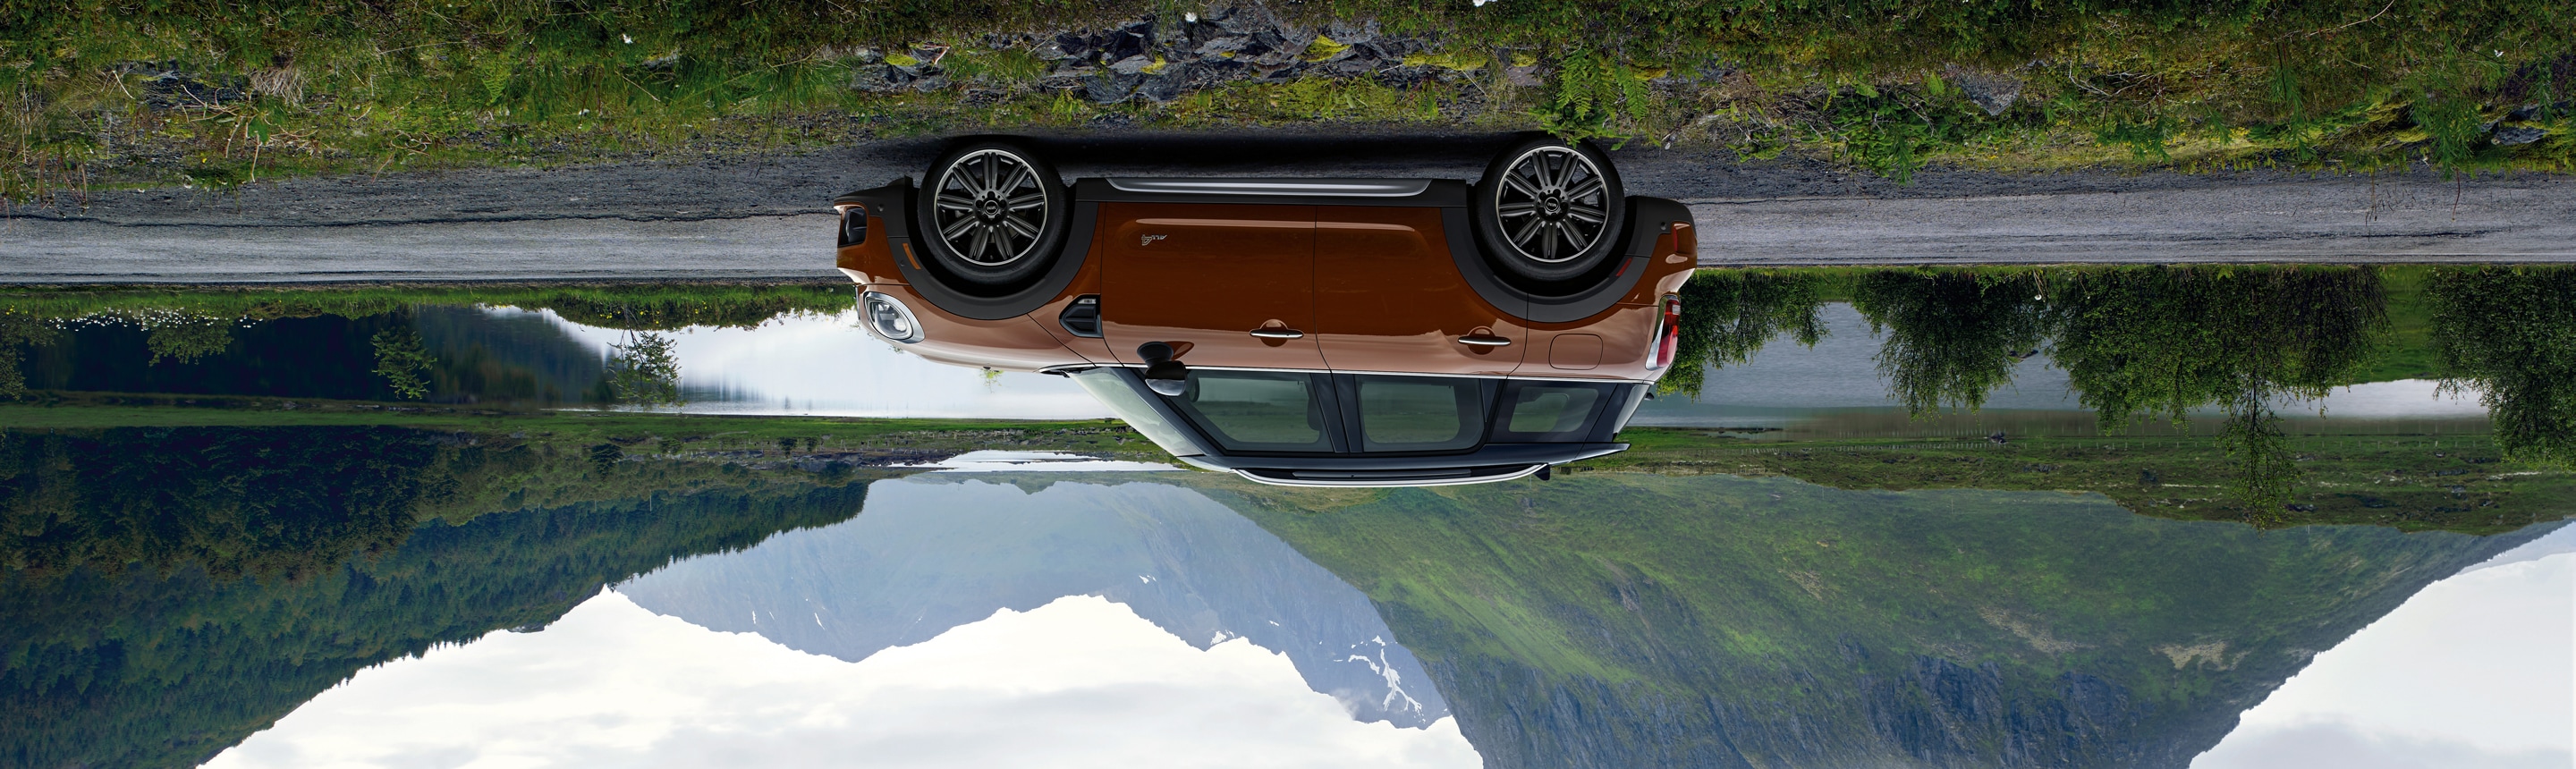 
Upside down
photo of Chestnut MINI Countryman in front of mountain landscape.
